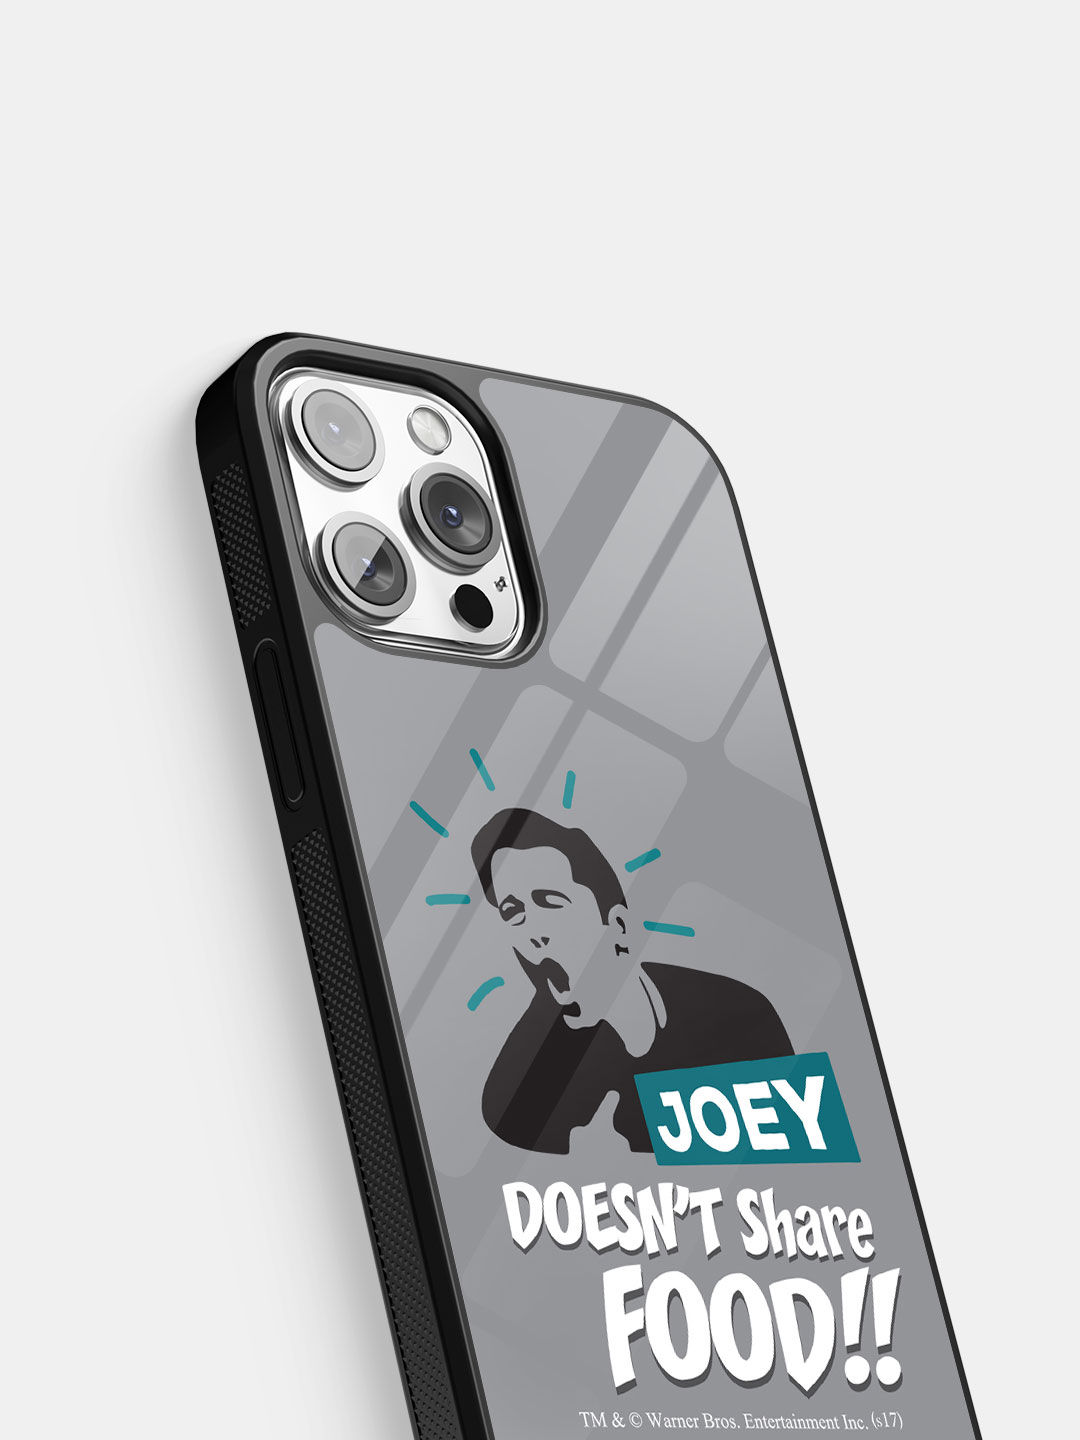 Friends Joey doesnt share food - Glass Case For iPhone 13 Pro Max